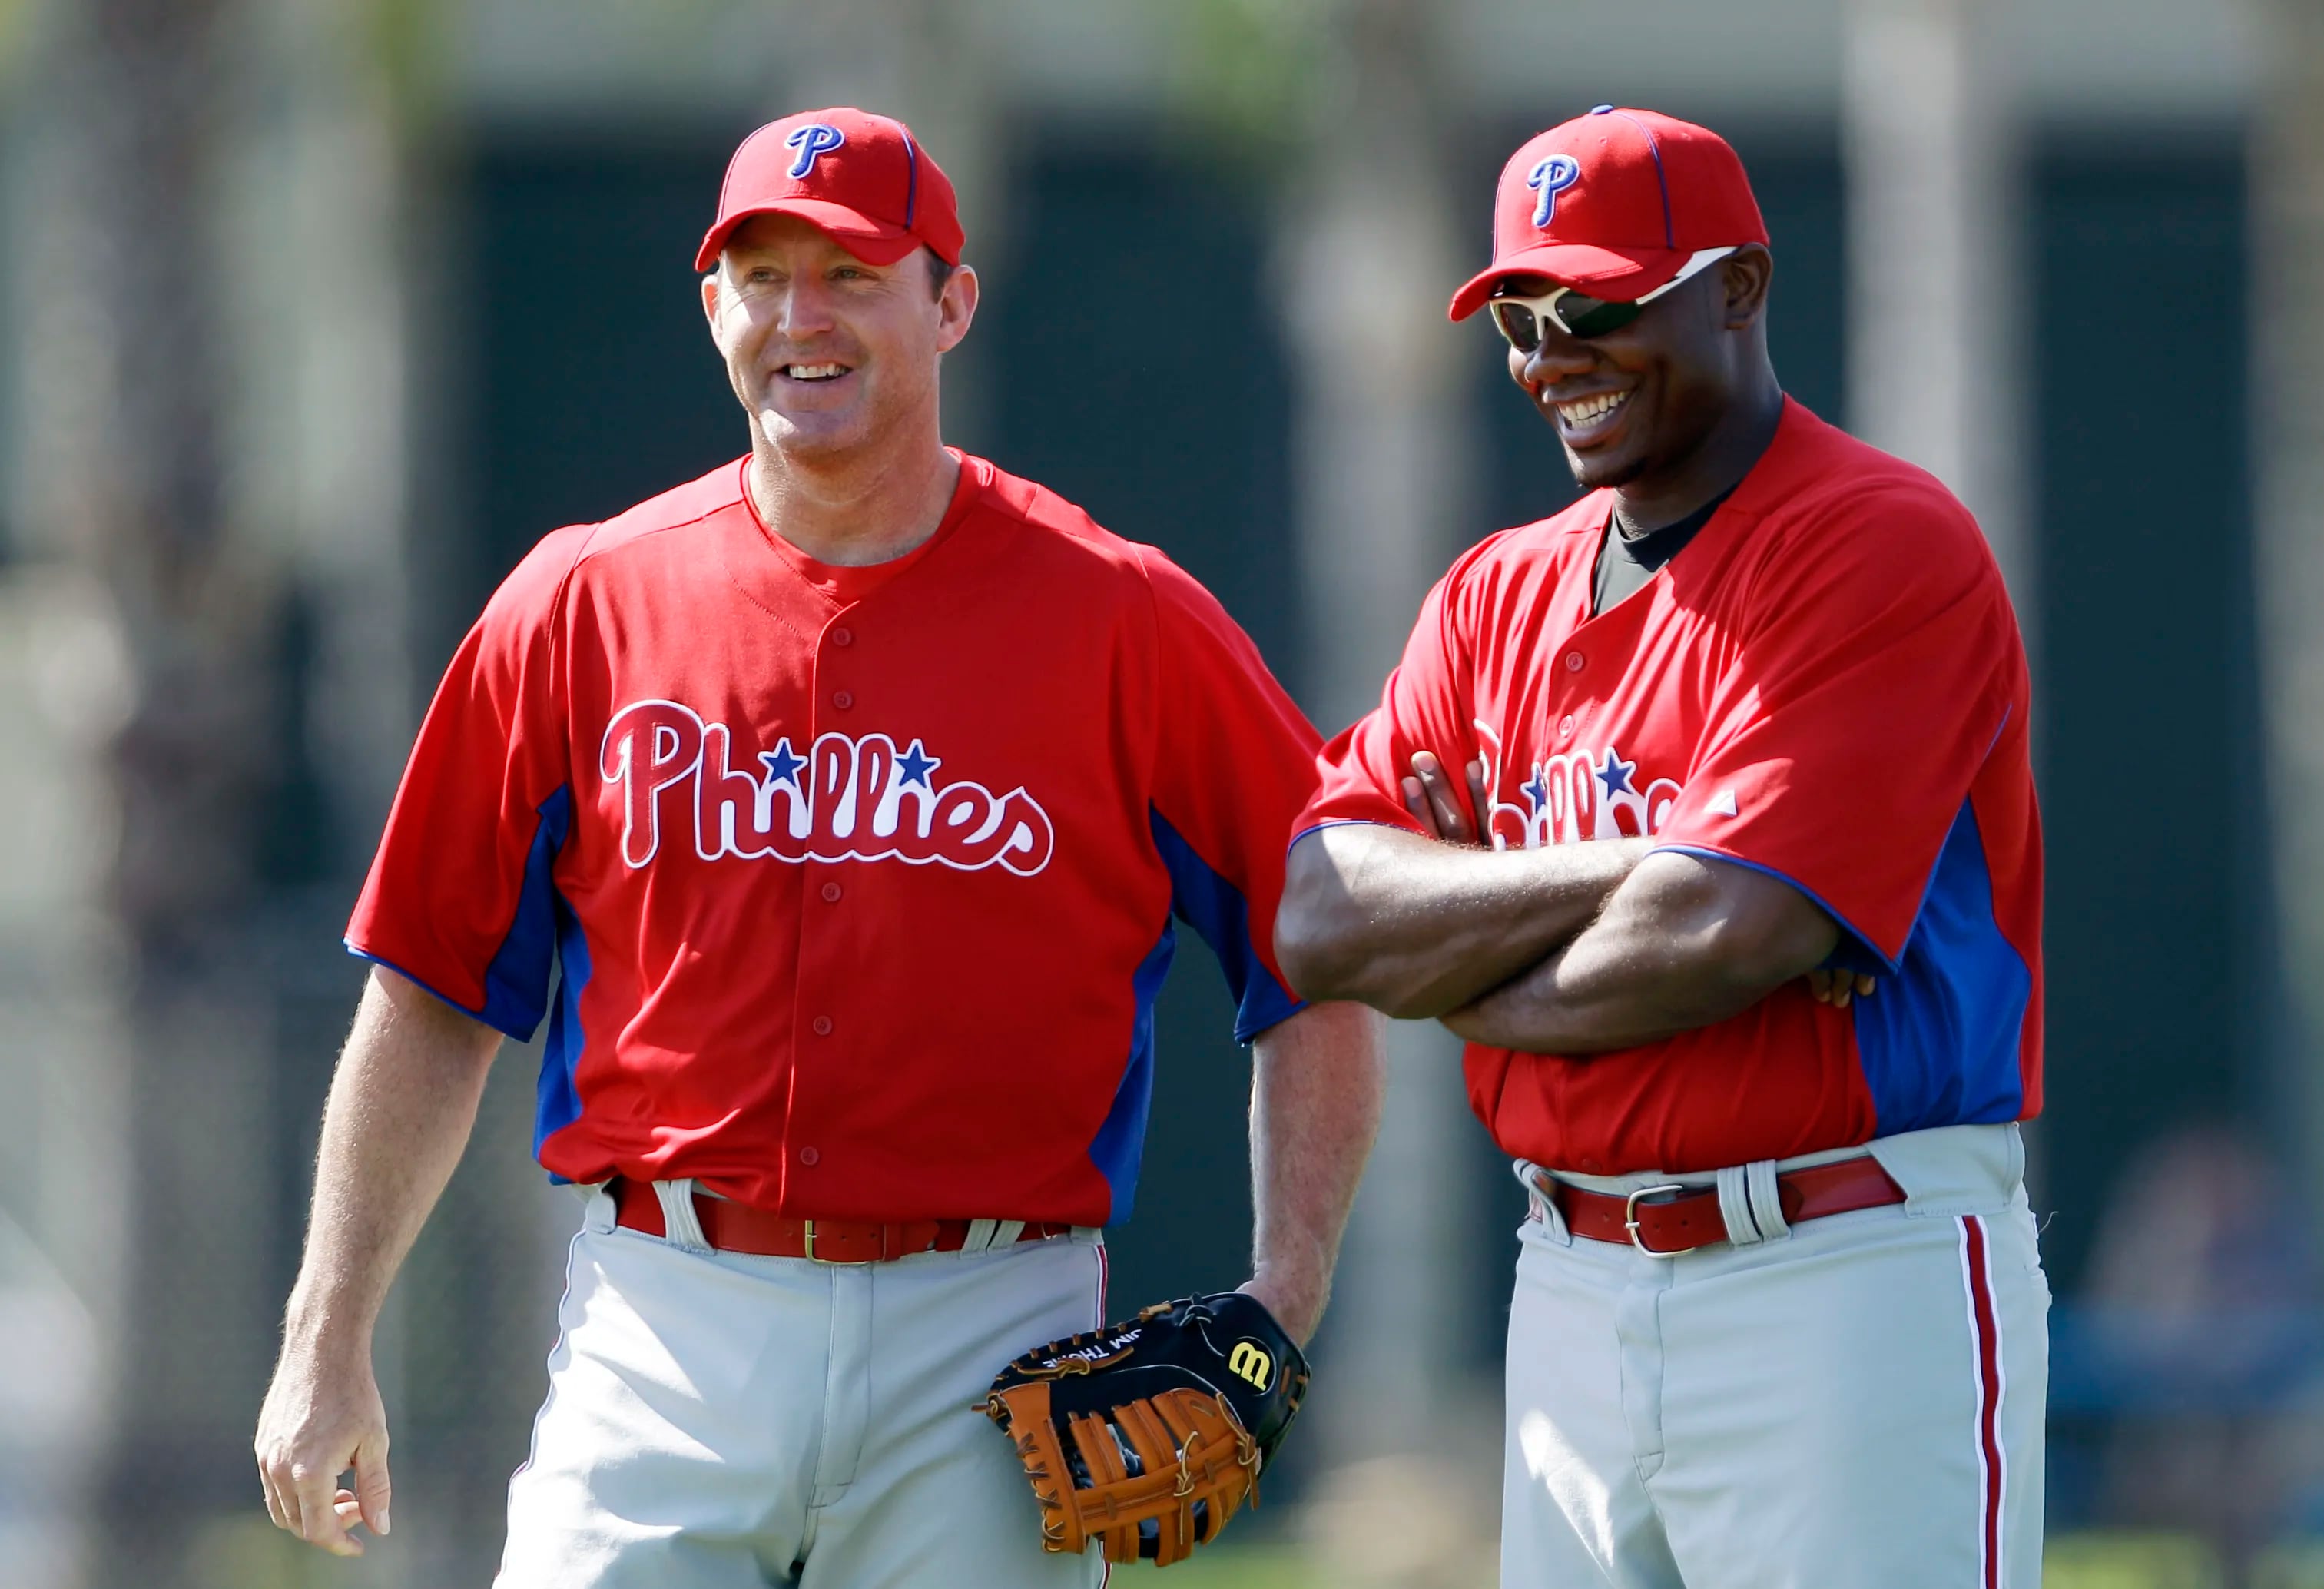 Countdown to Cooperstown: Work ethic made Jim Thome a fan favorite